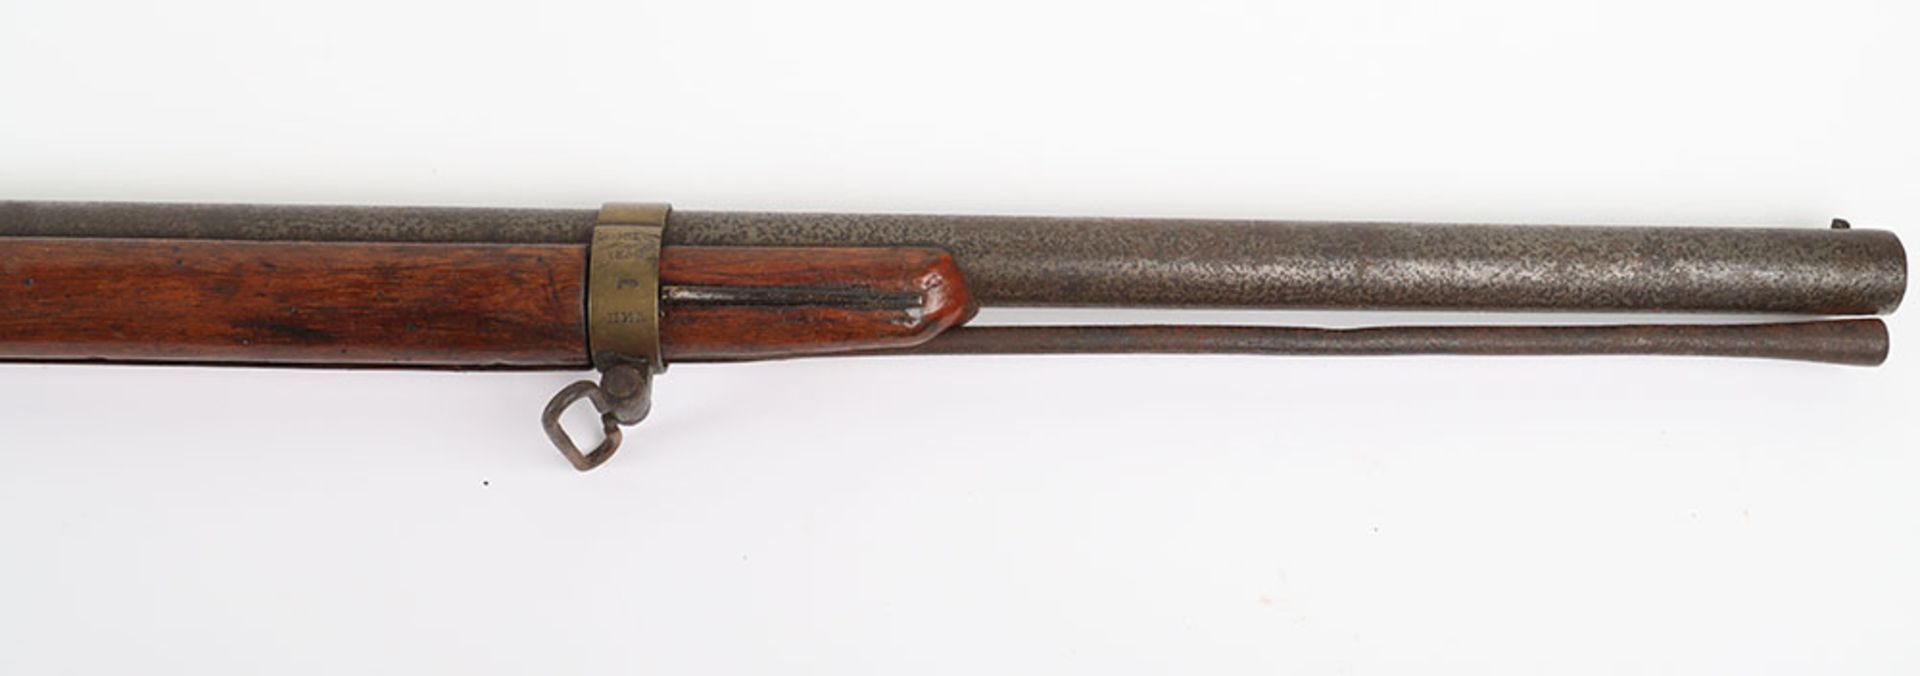 14-Bore Russian Back Action Military Musket - Image 6 of 17